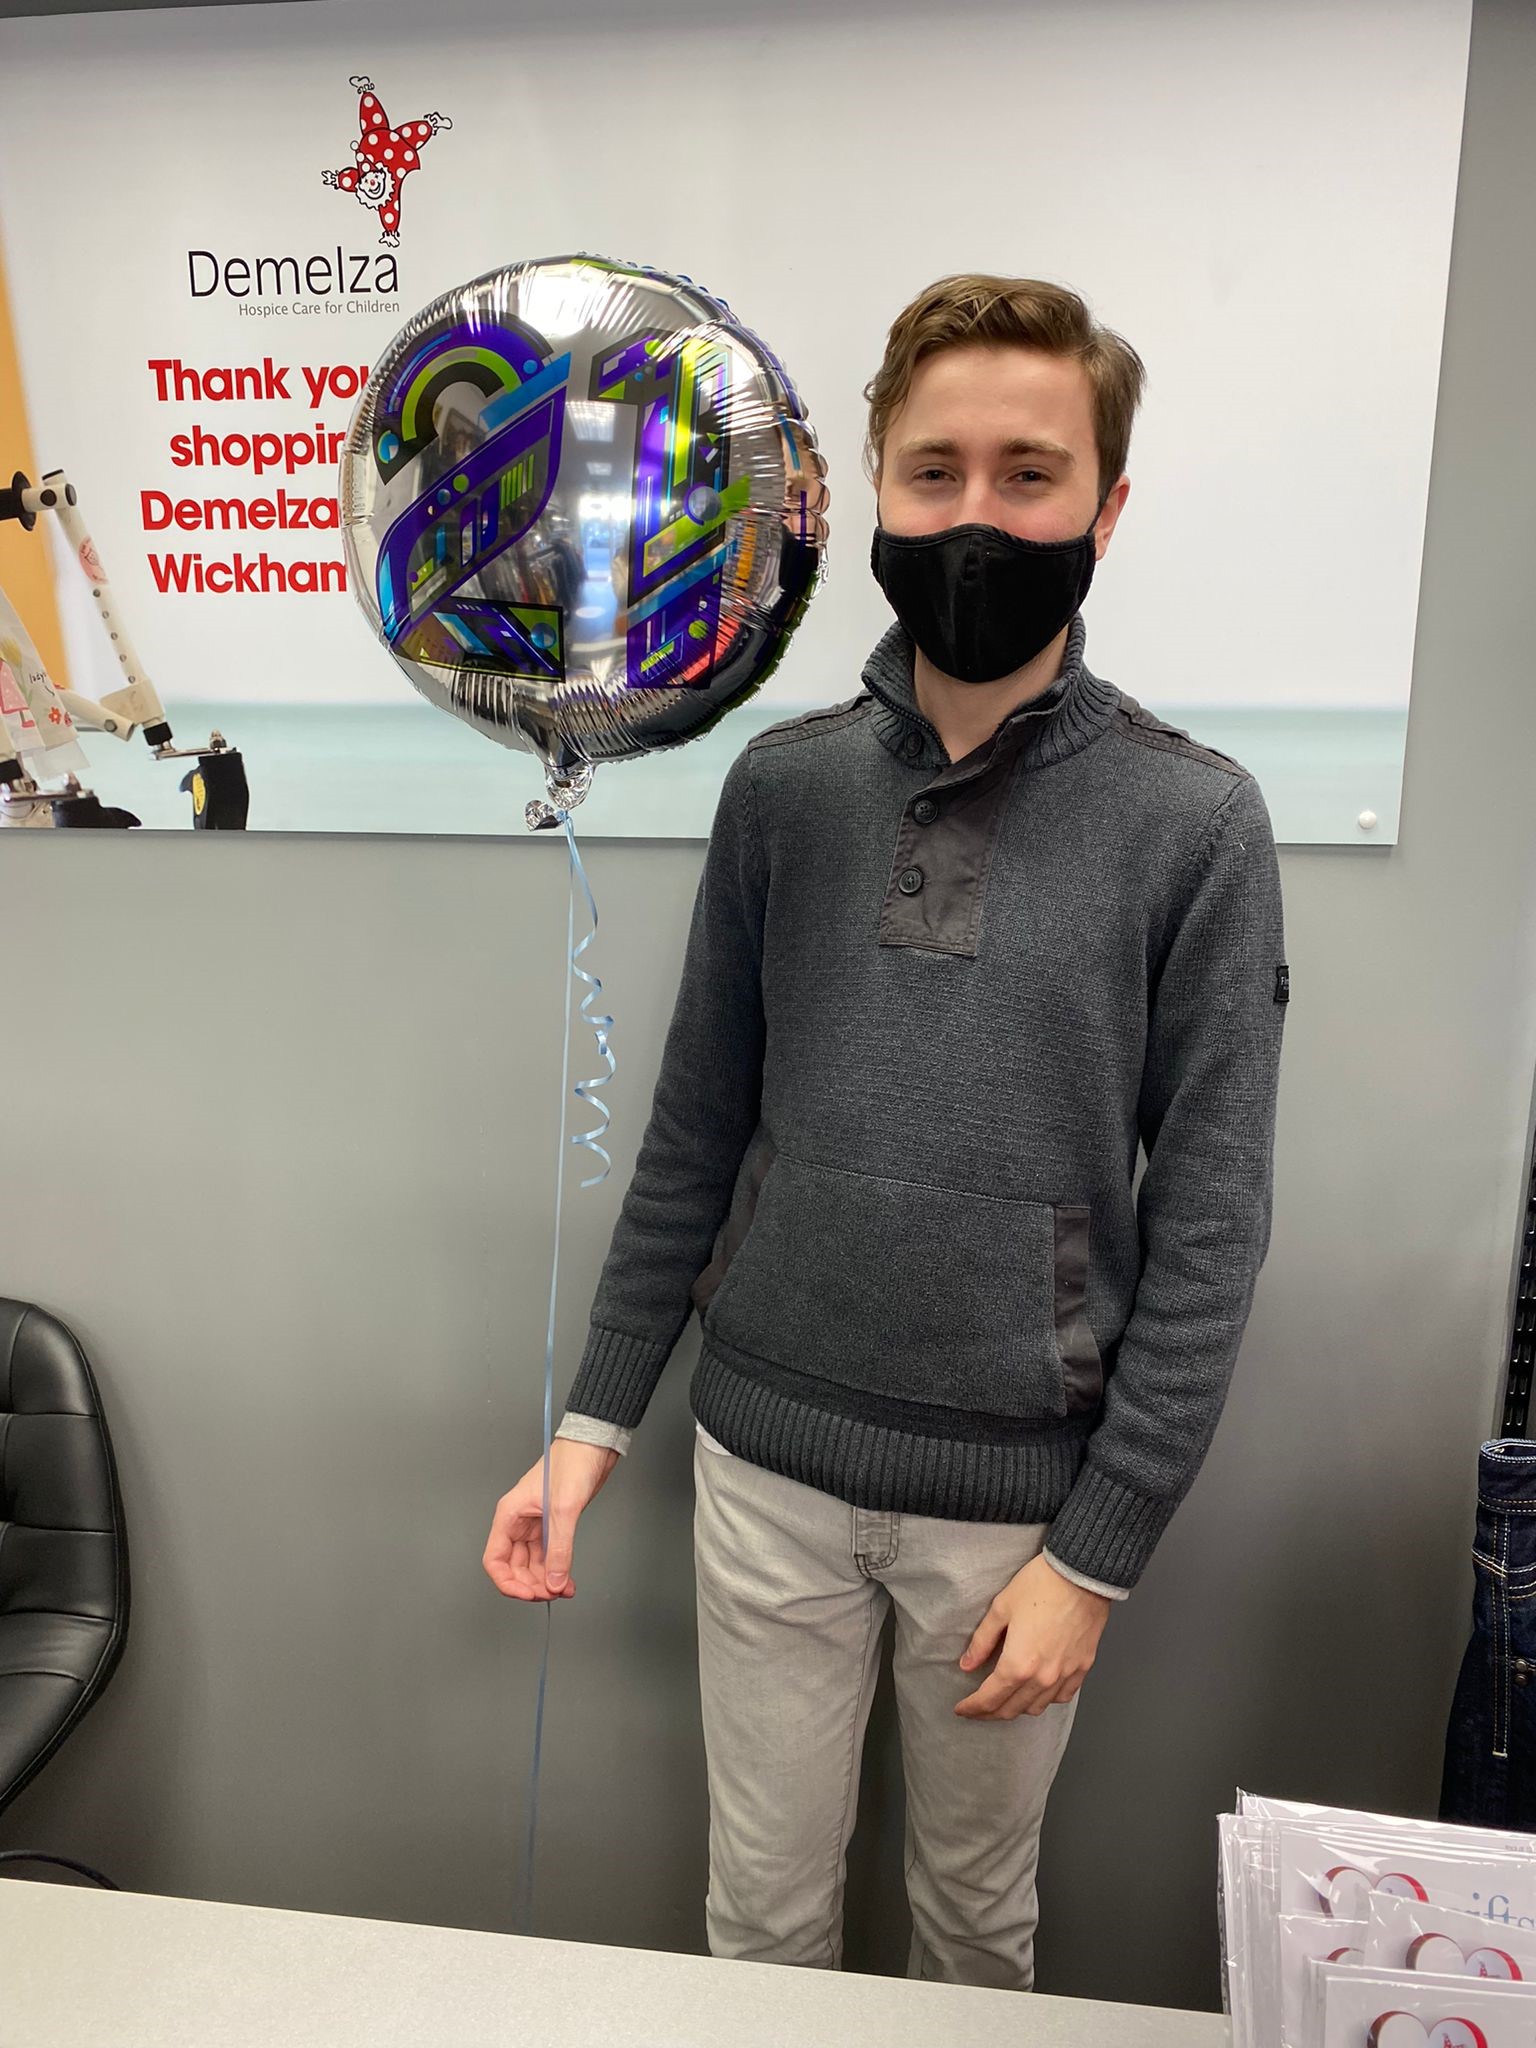 Assistant Manager Nathan, standing next to birthday balloon.